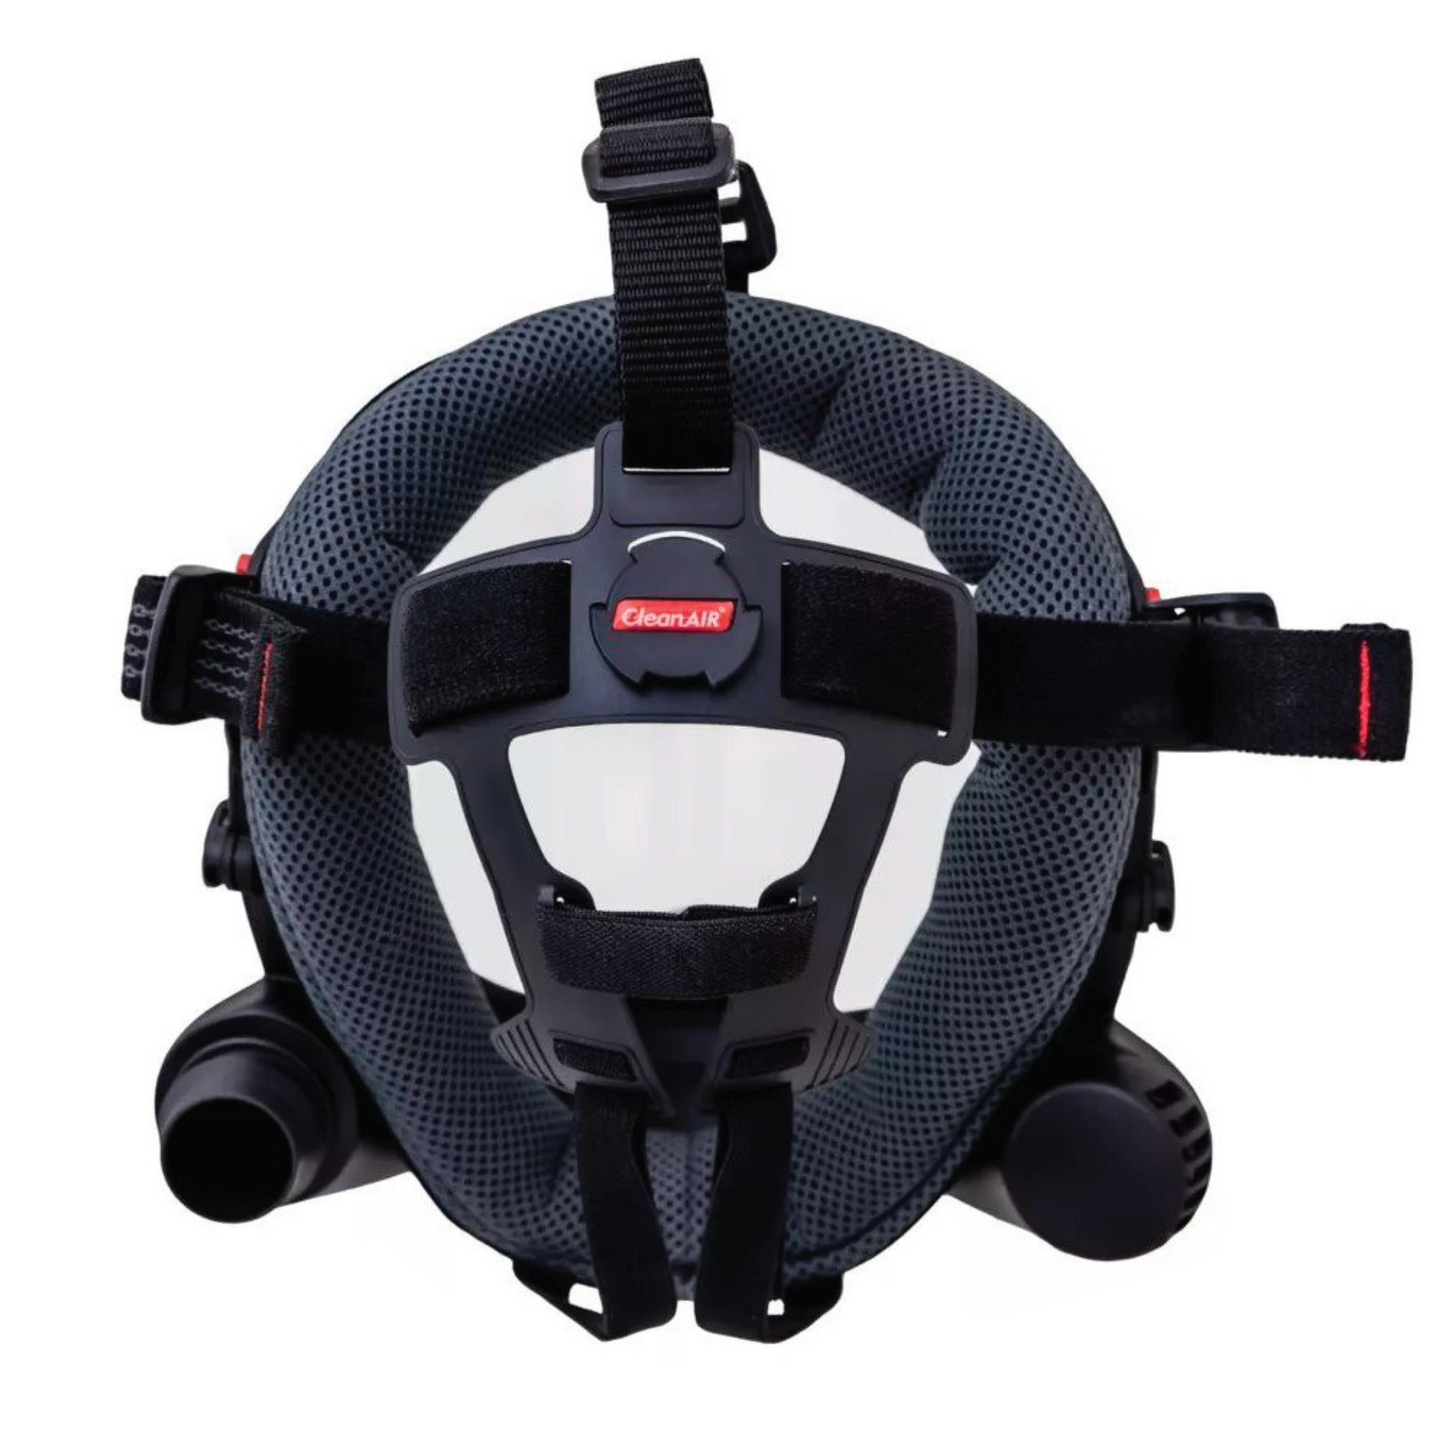 UniMask with 5-point harness. Allows for stable and secure fitment to any head size or shape.